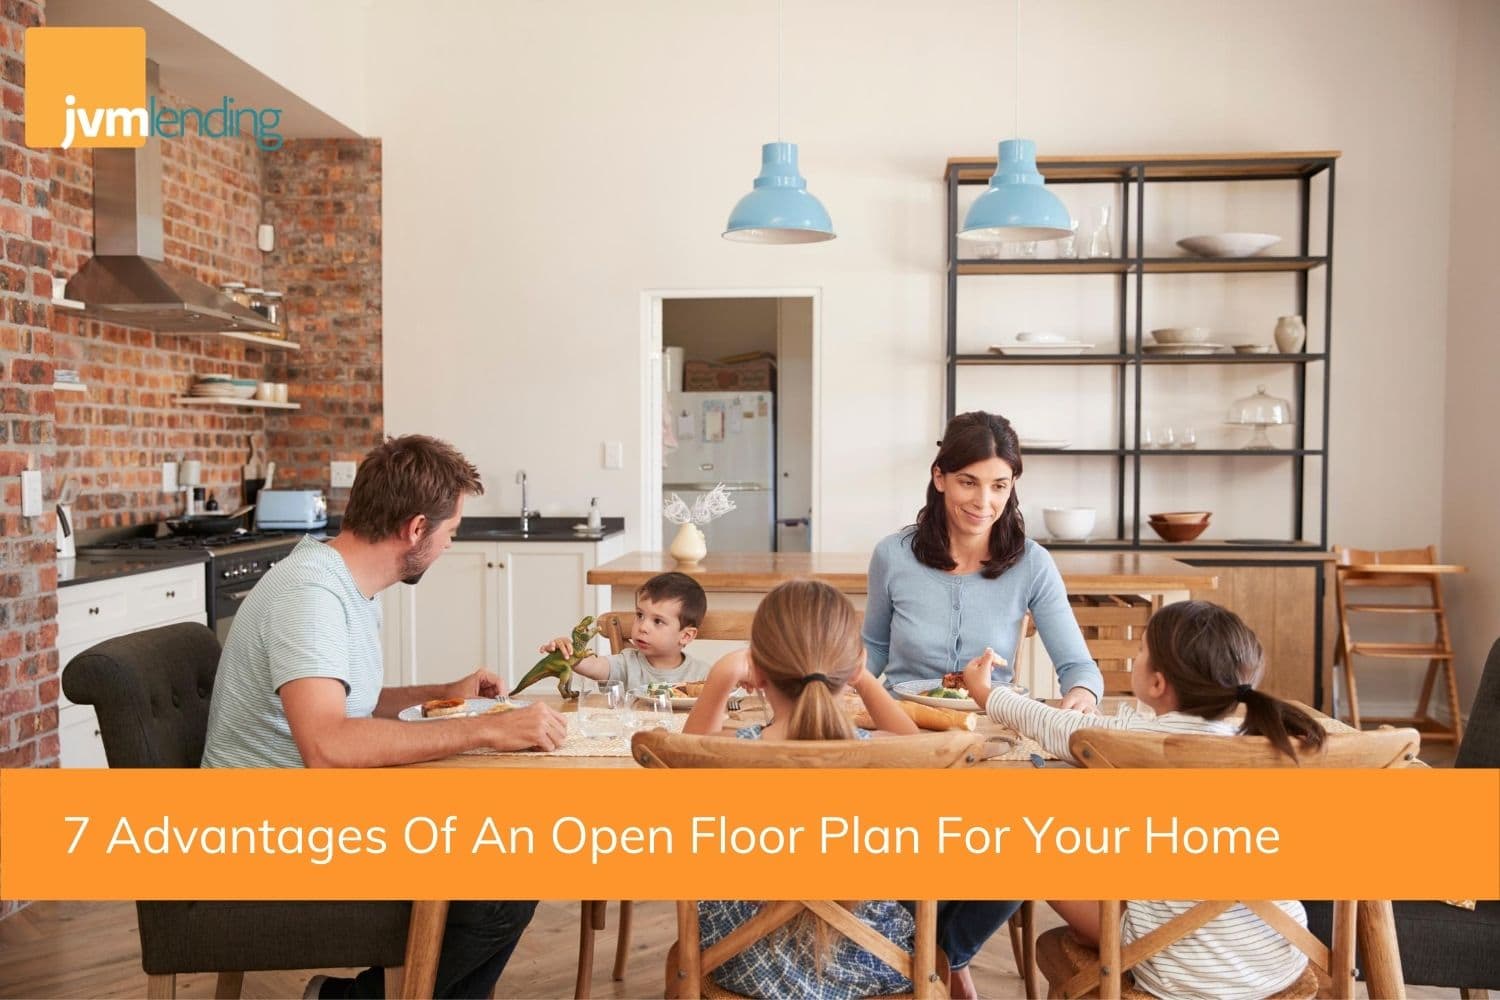 A family enjoys dinner together in the dining room of their open concept home.